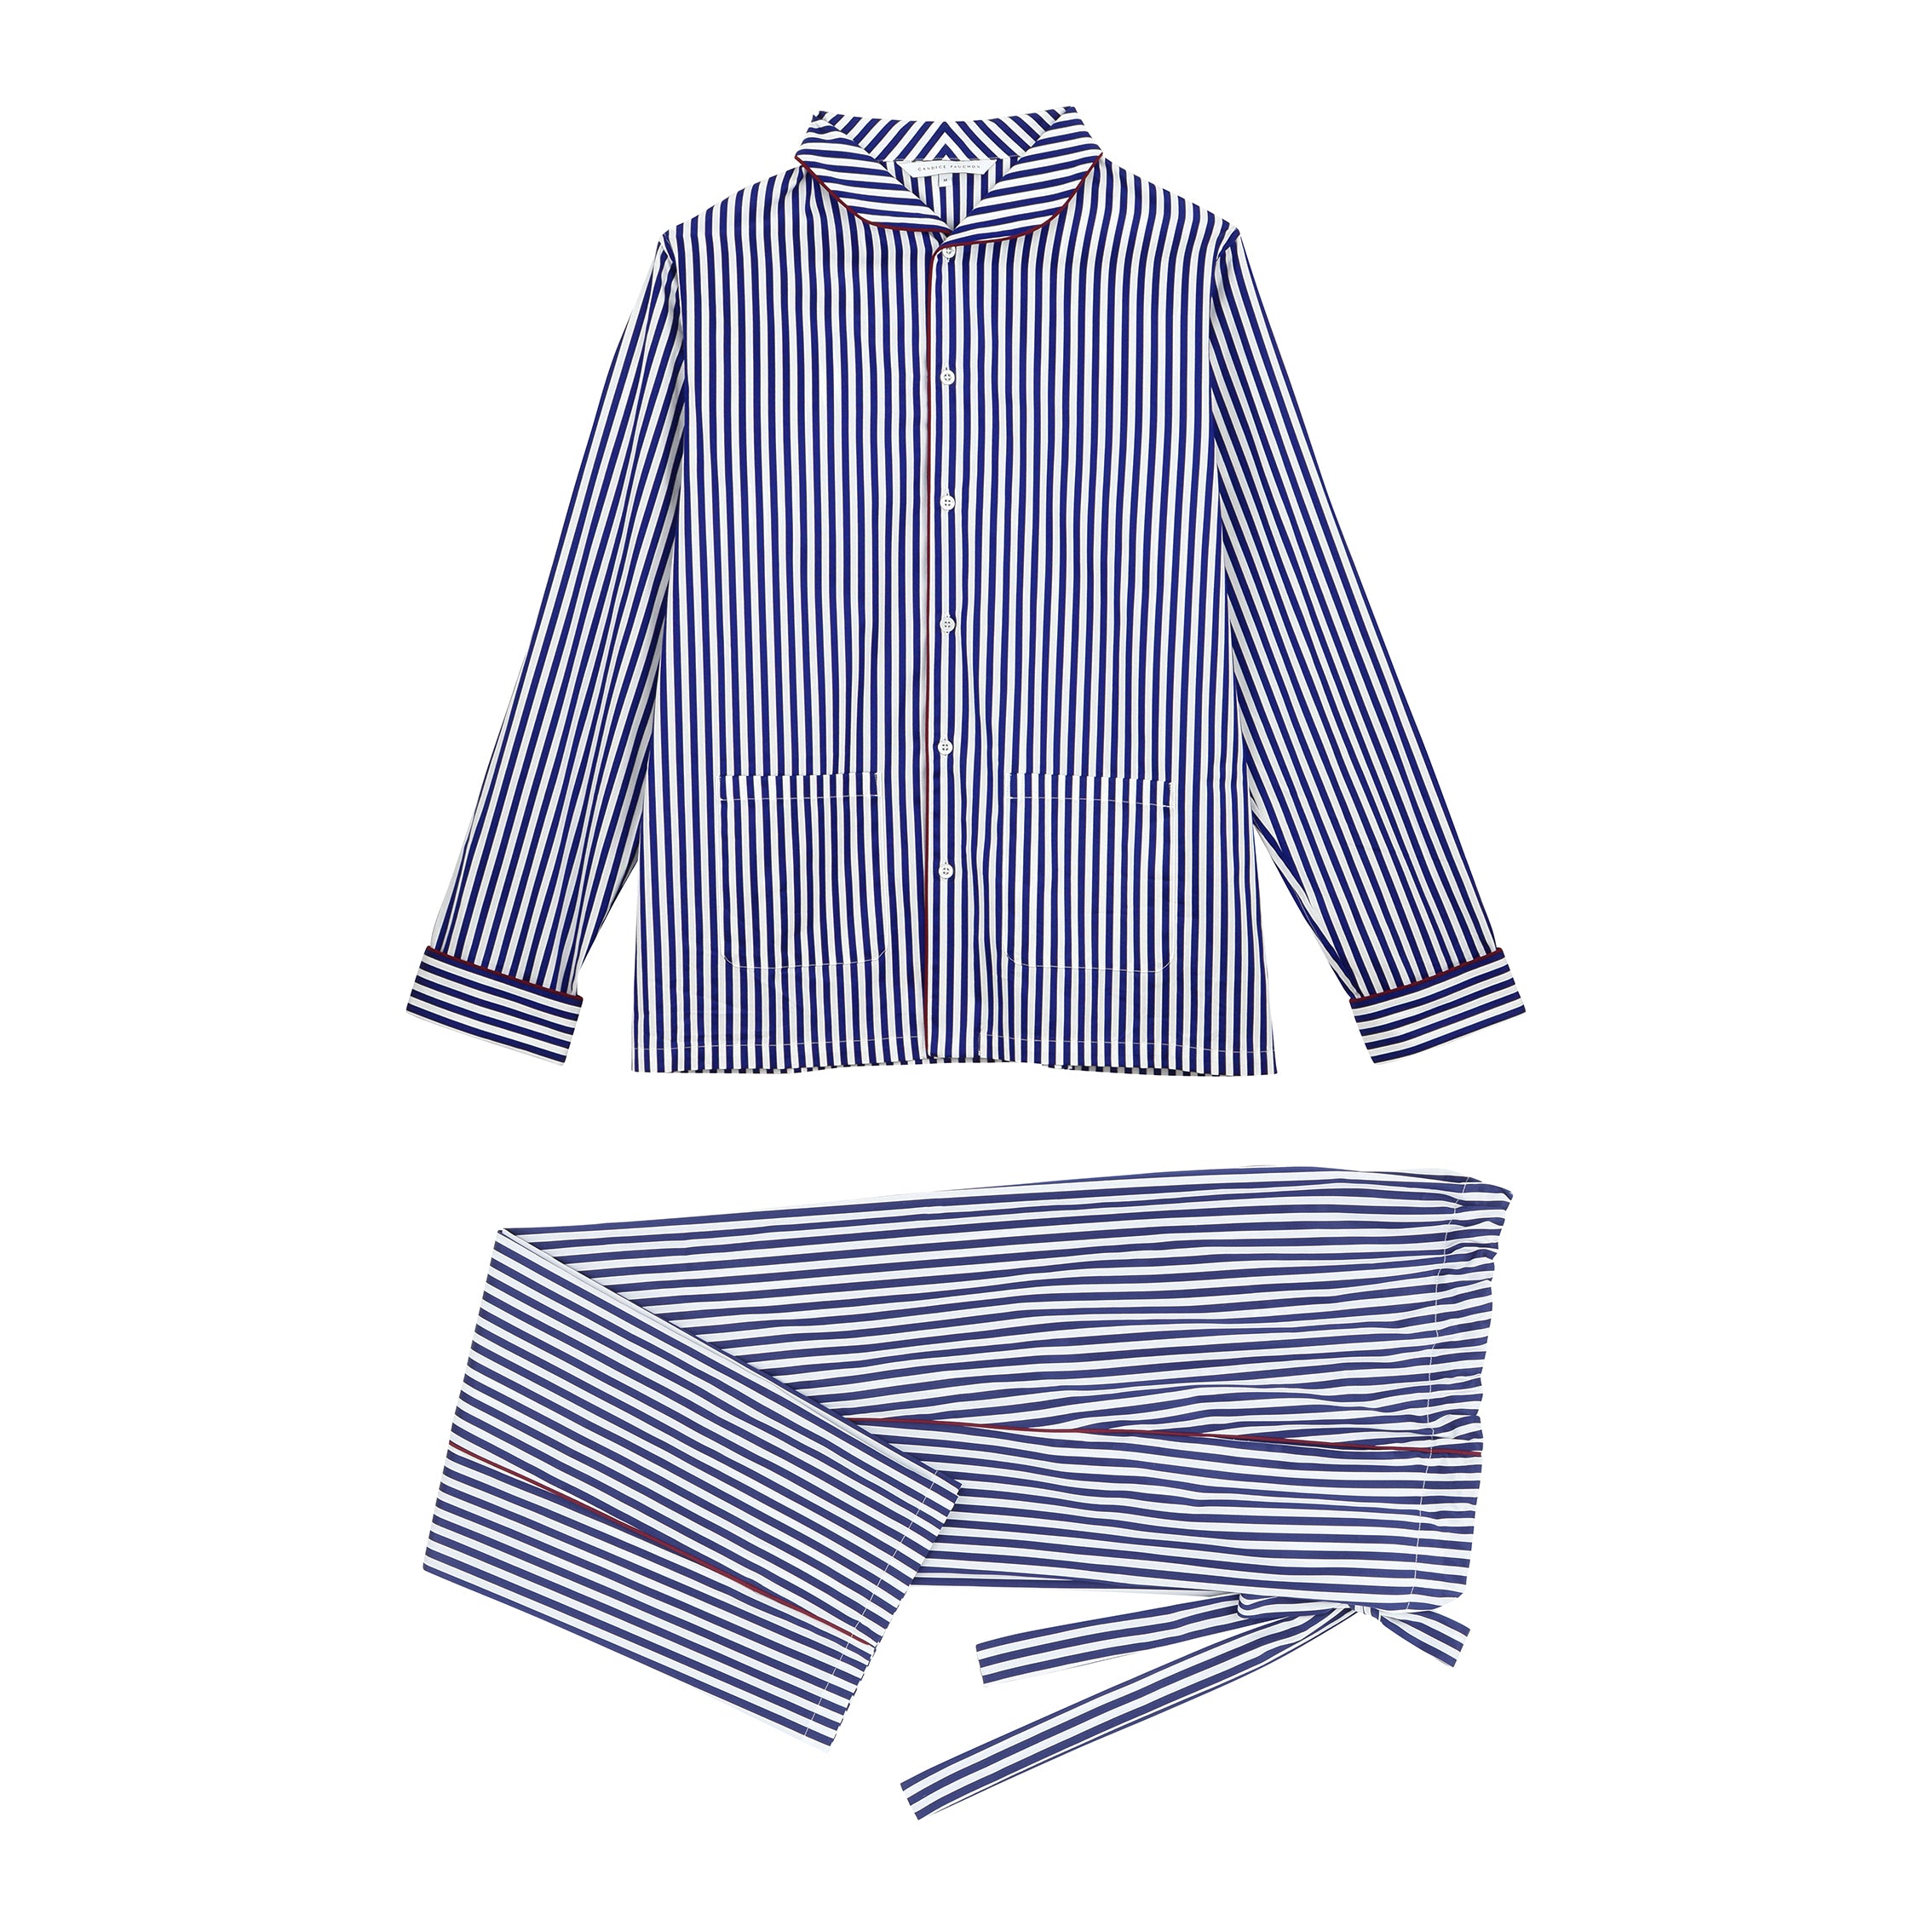 The Waldorf in striped midnight blue cotton broadcloth